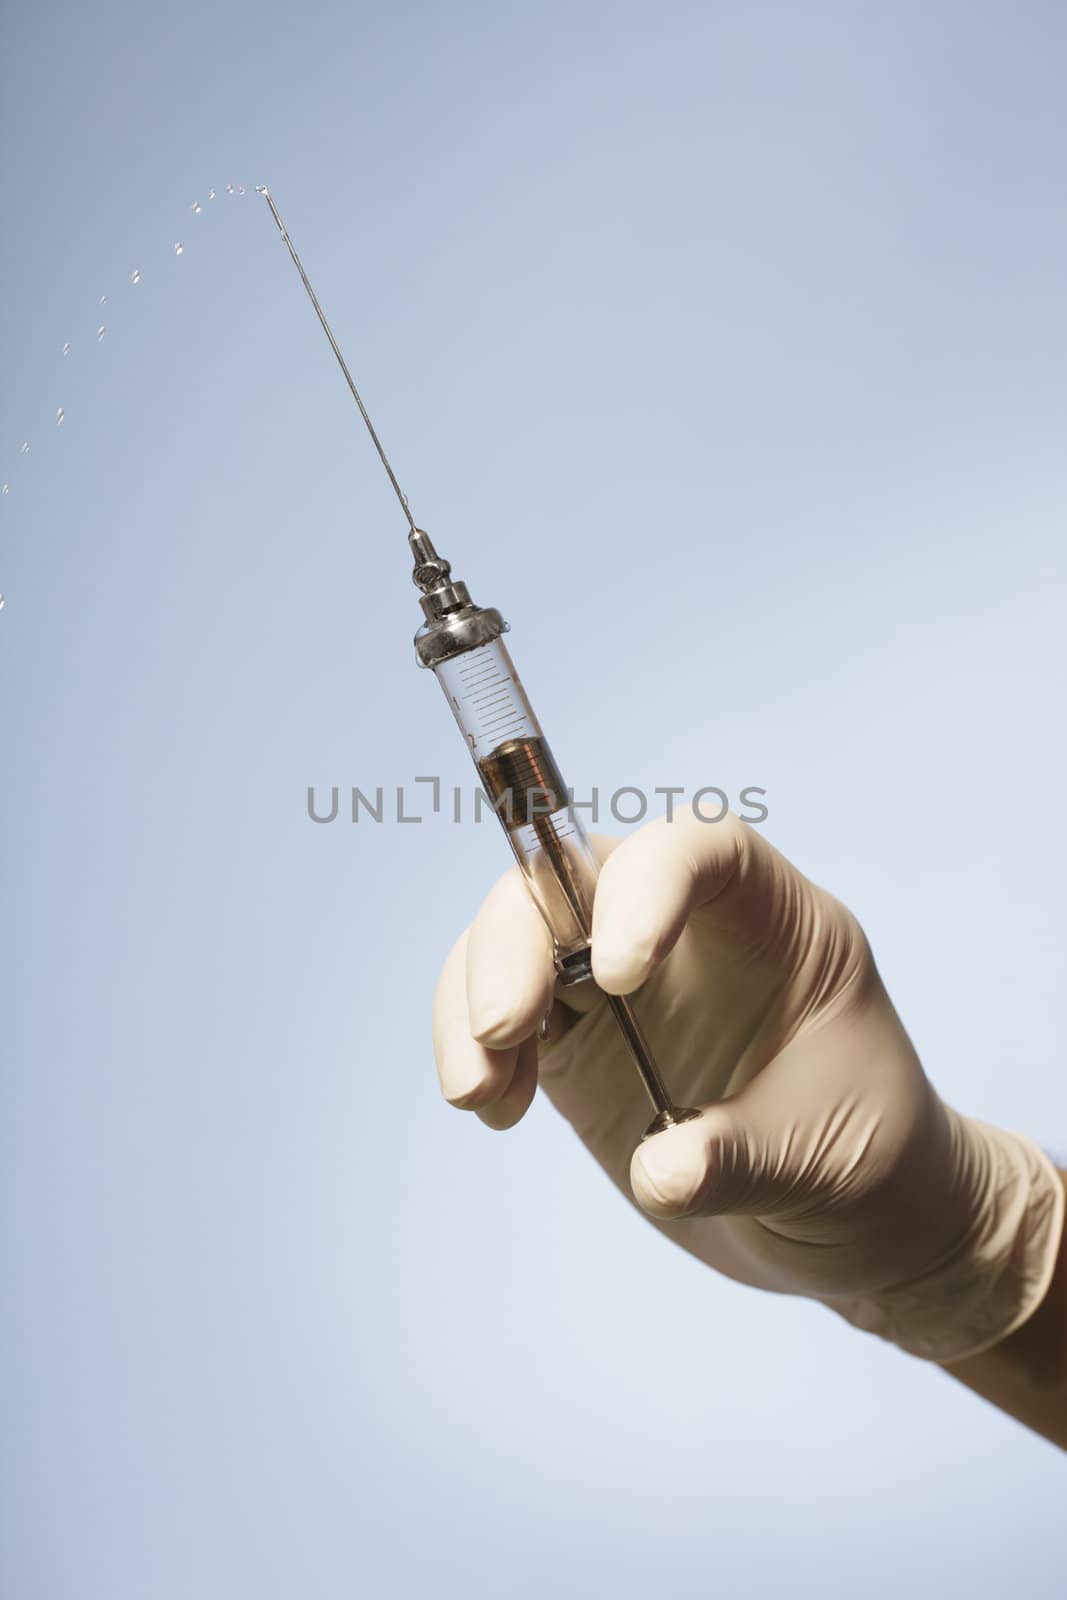 Hand holding an old-fashioned glass syringe